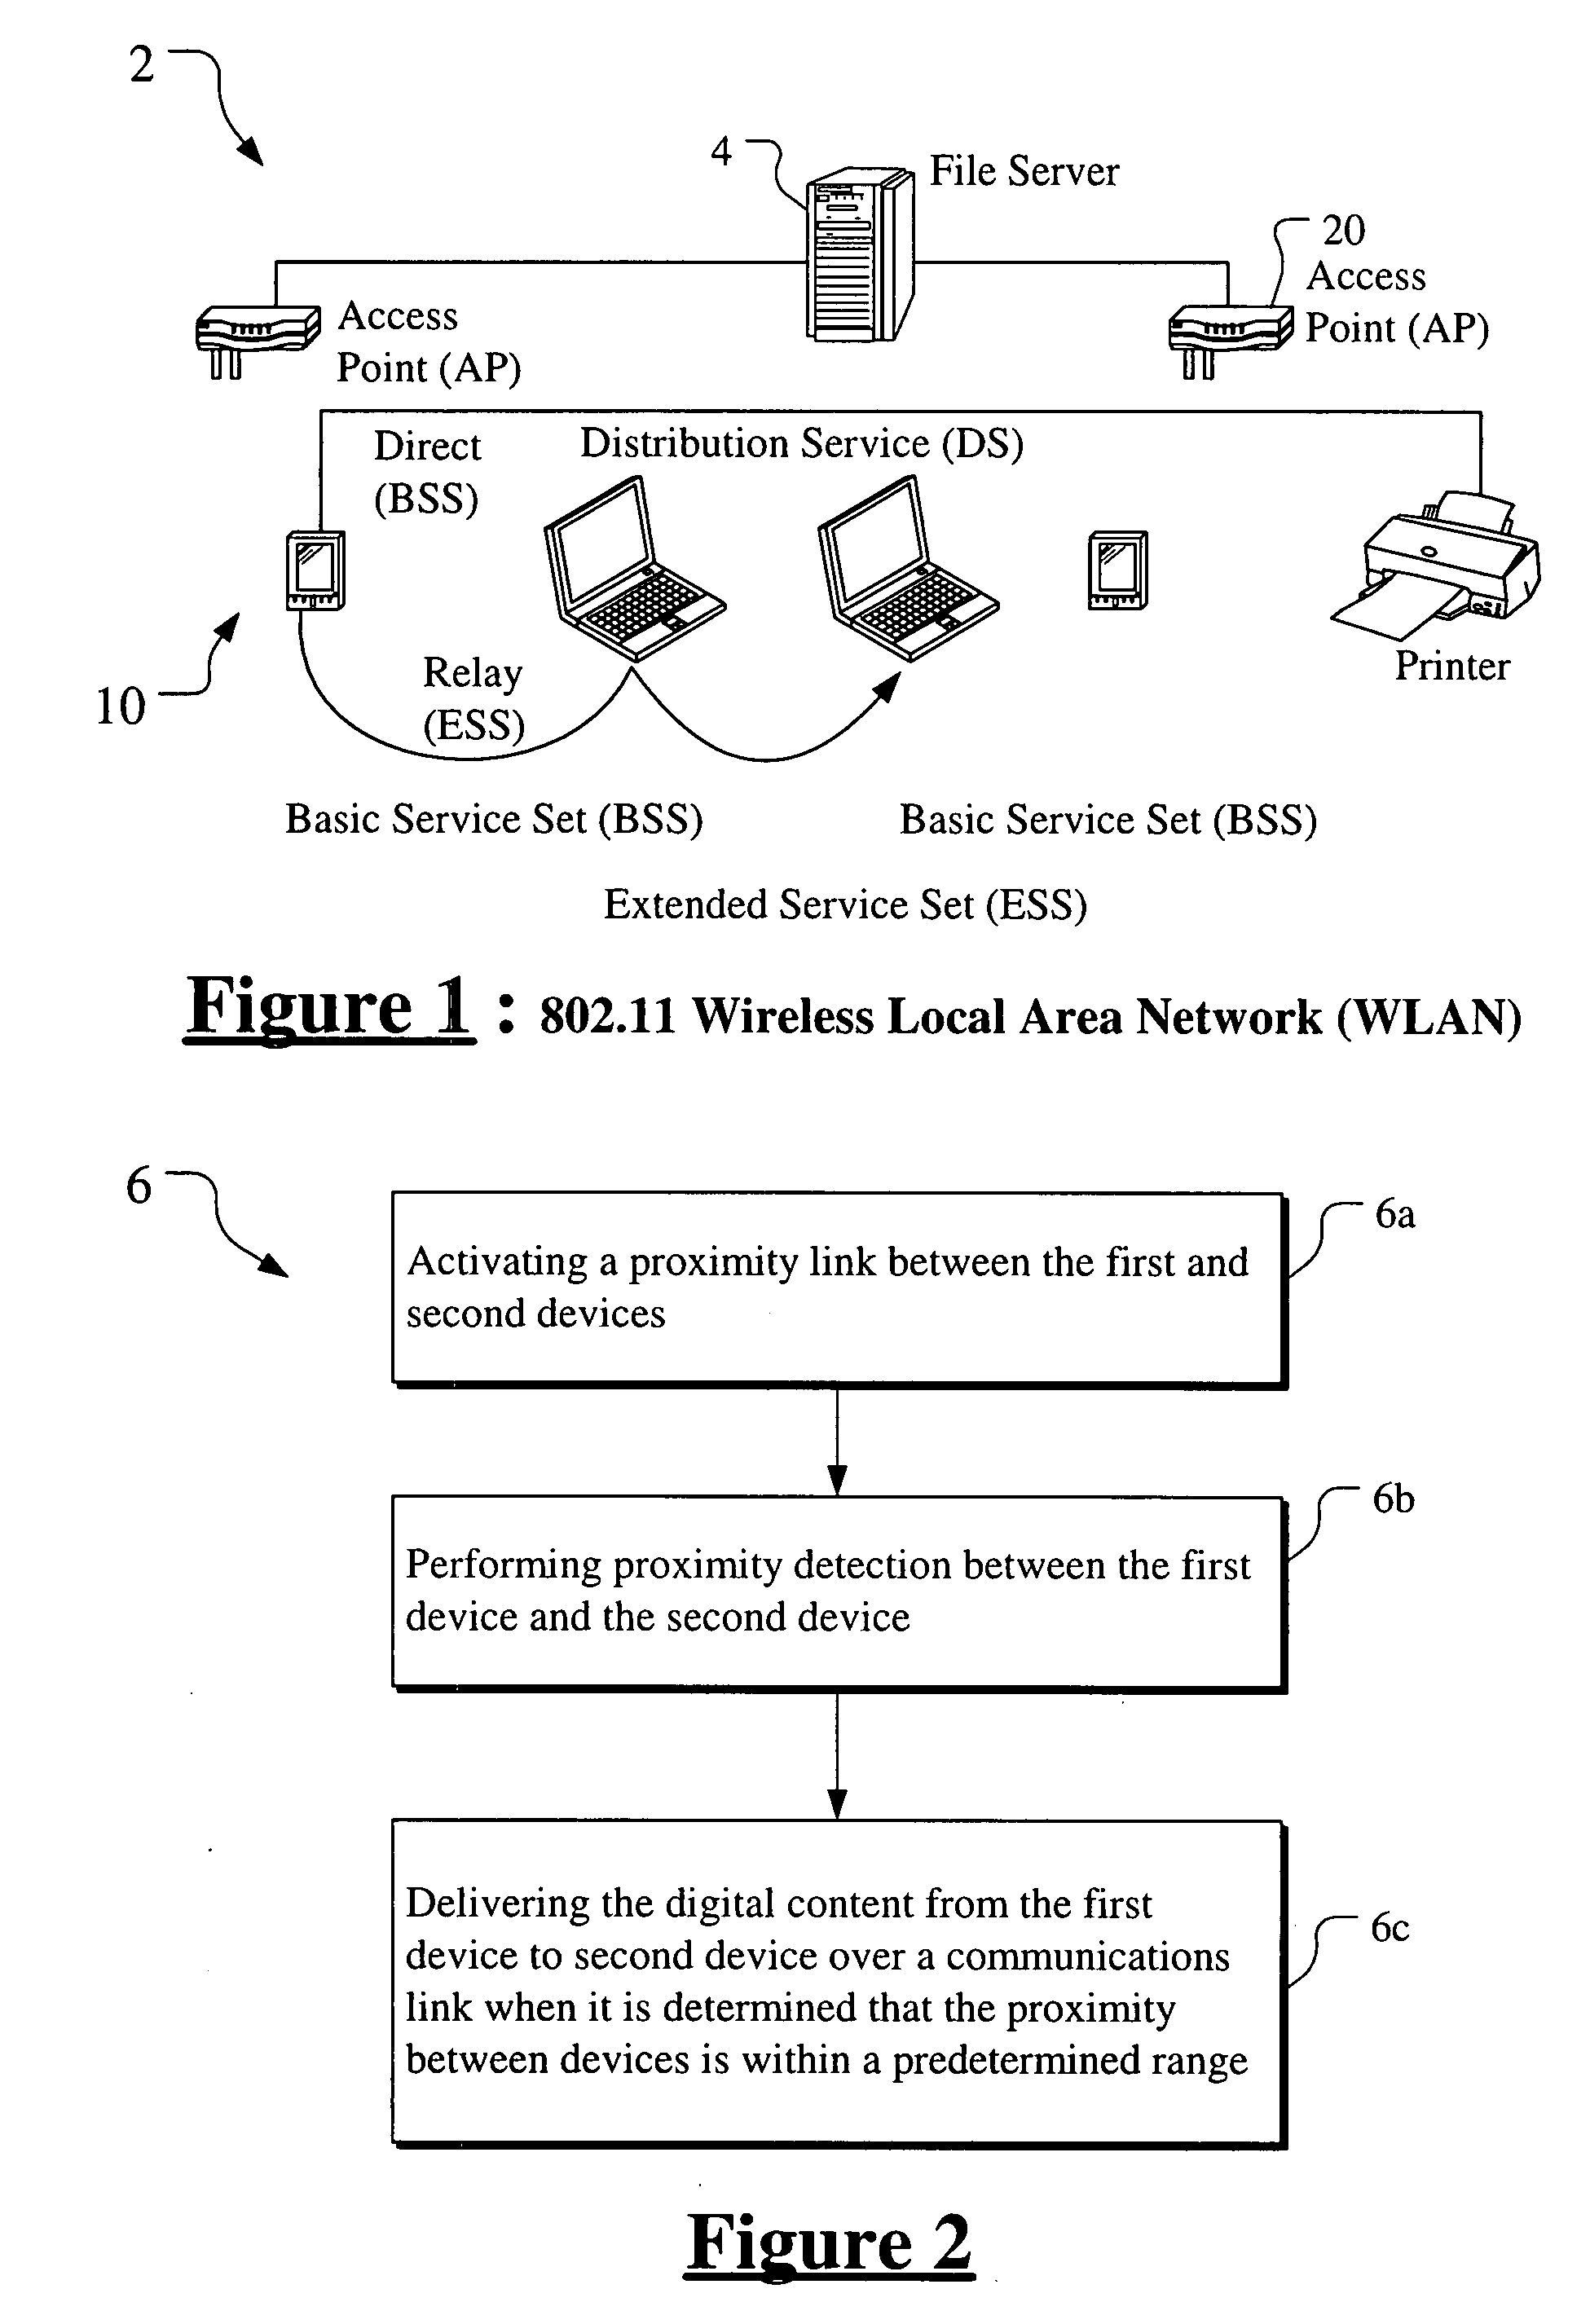 Using secondary bearer to detect proximity of a device